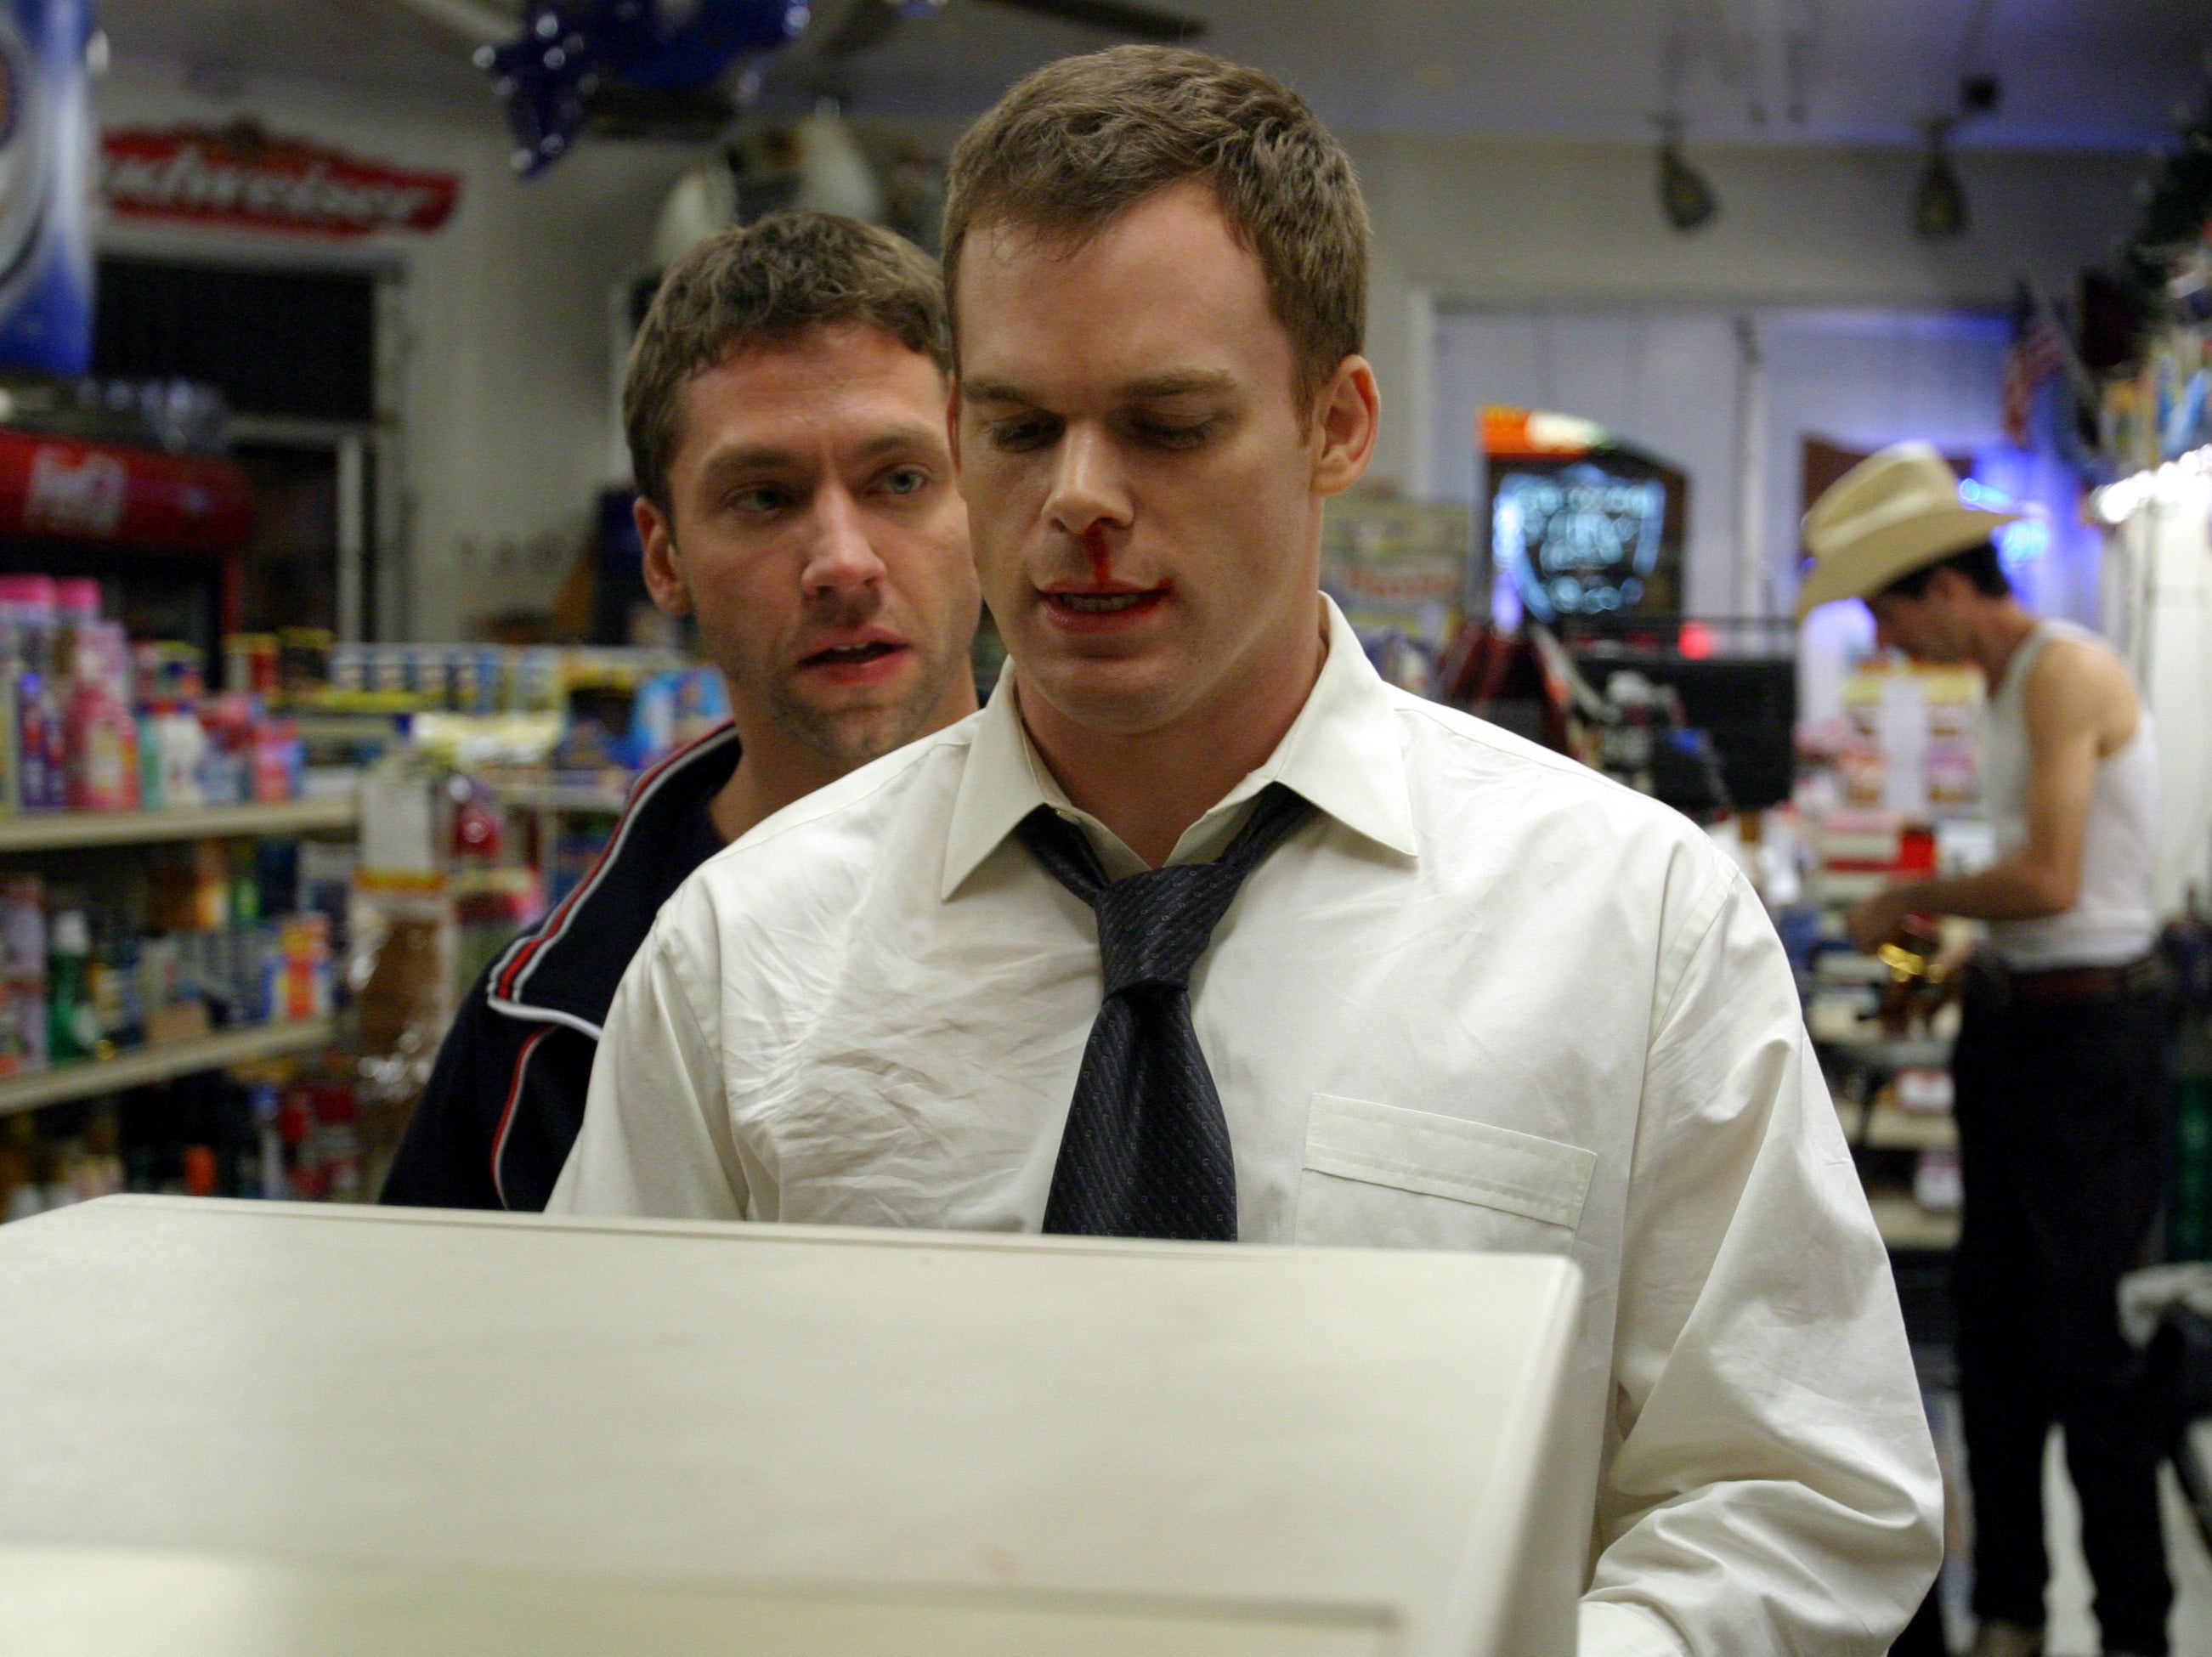 David (Michael C Hall) and his tormentor (Michael Weston) in the scandalising episode ‘That’s My Dog’